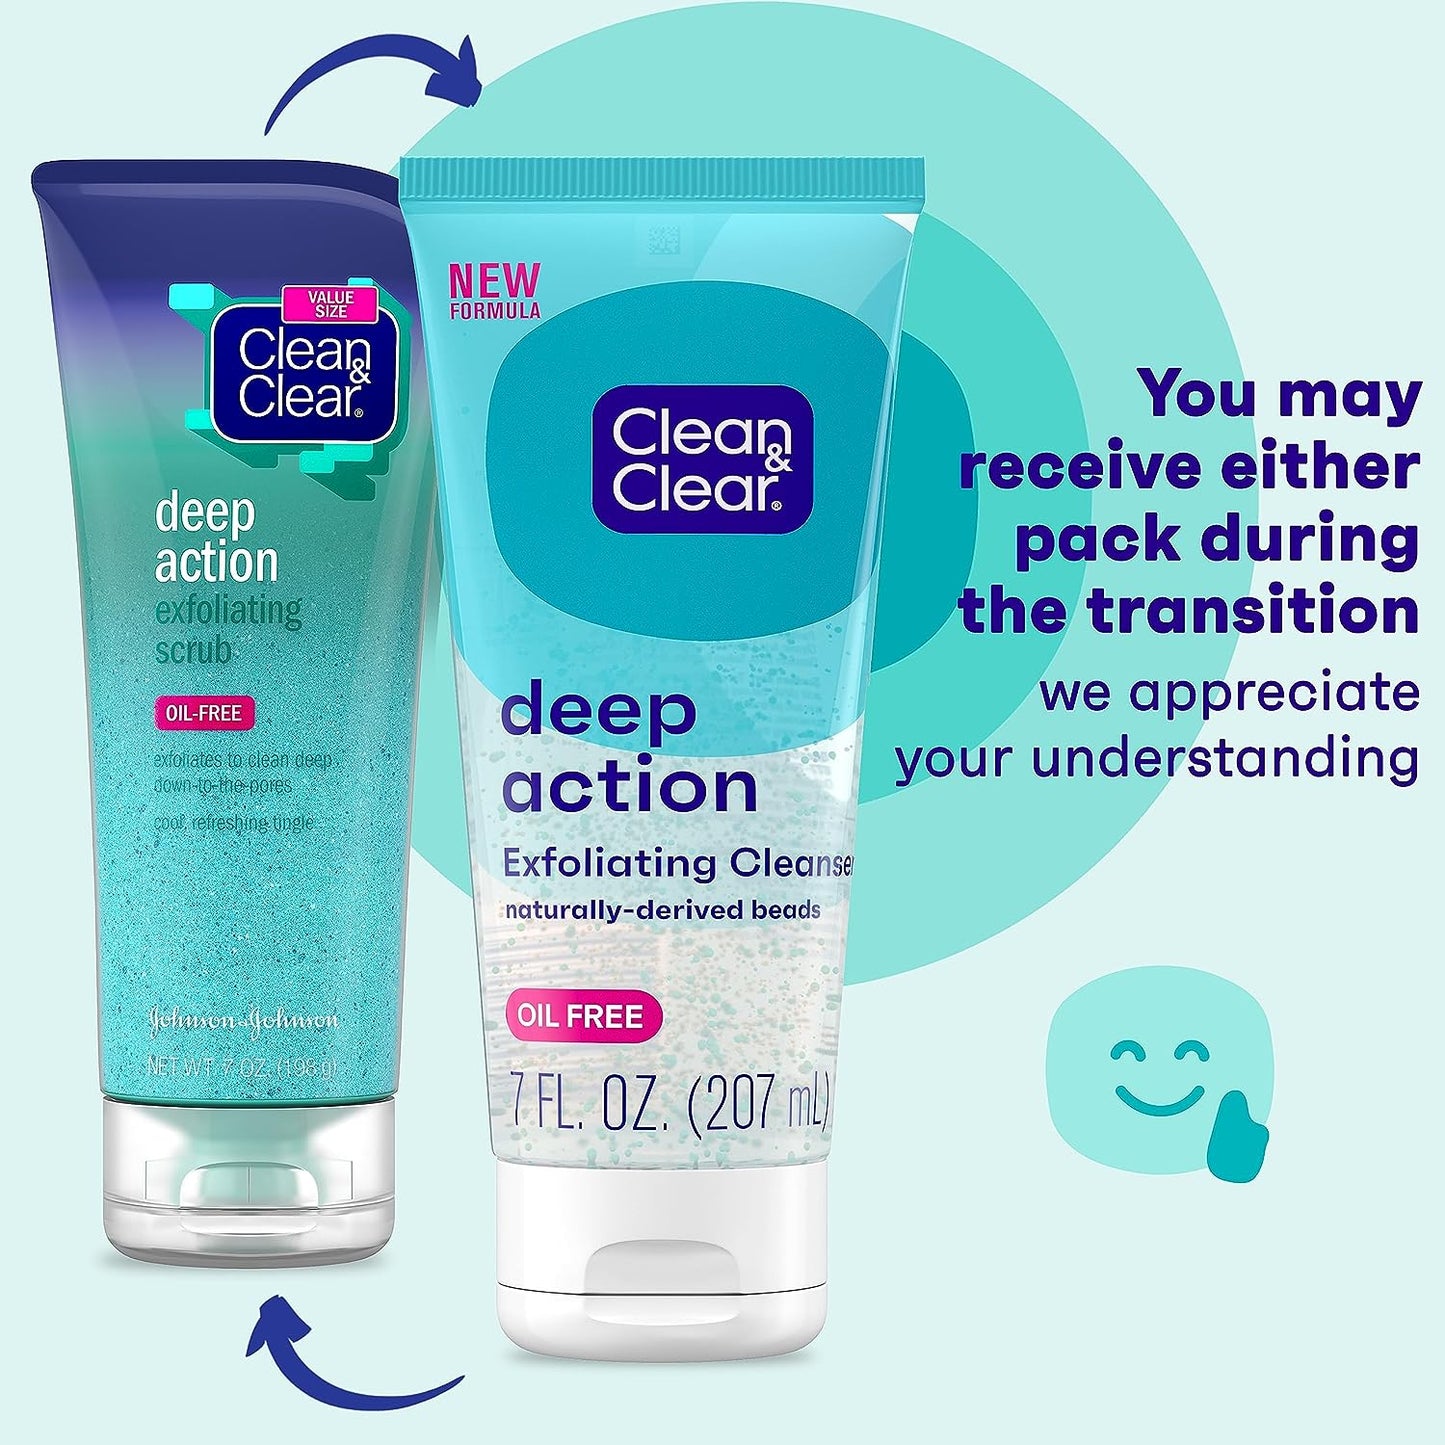 Clean & Clear Oil-Free Deep Action Exfoliating Facial Scrub, Cooling Daily Face Wash with Exfoliating Beads for Smooth Skin, Cleanses Deep down to the Pores to Remove Dirt, Oil & Makeup, 7 Oz